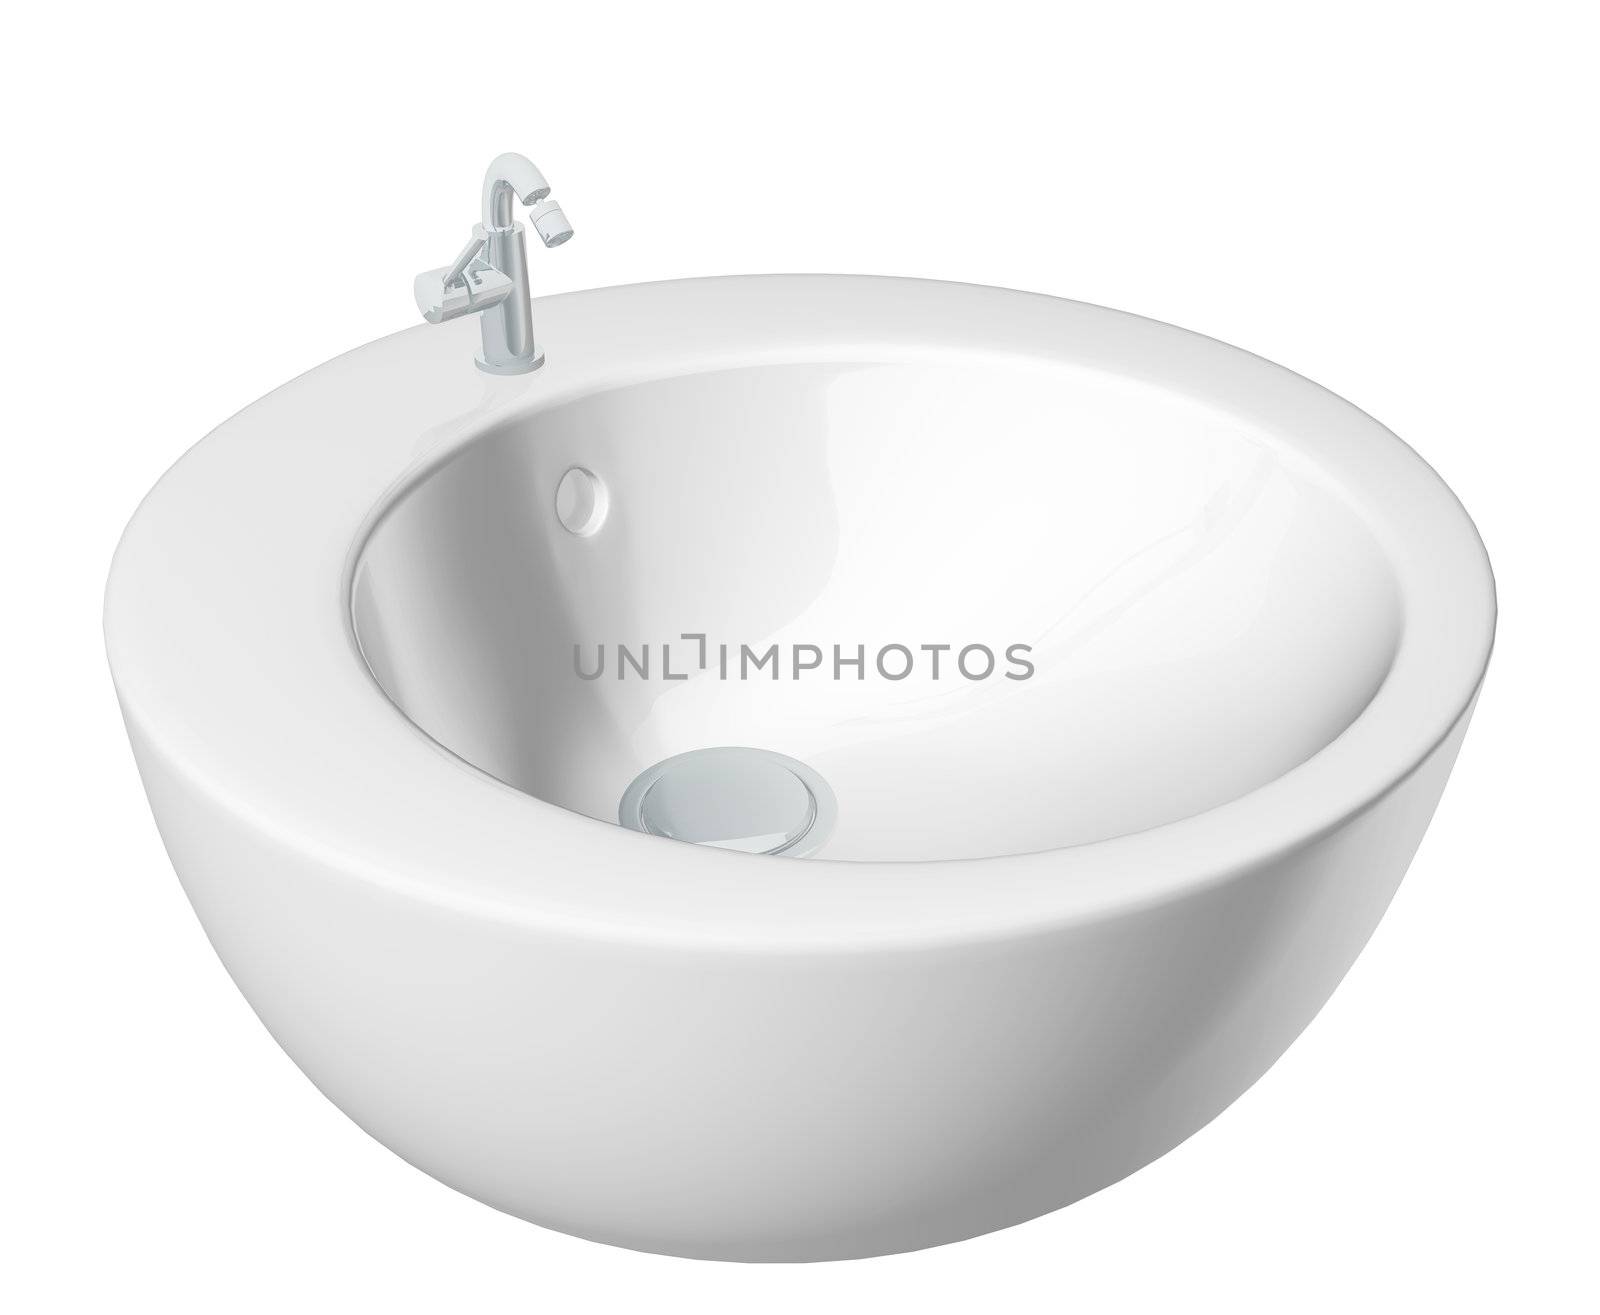 Modern round washbasin or sink, cream colored by Morphart